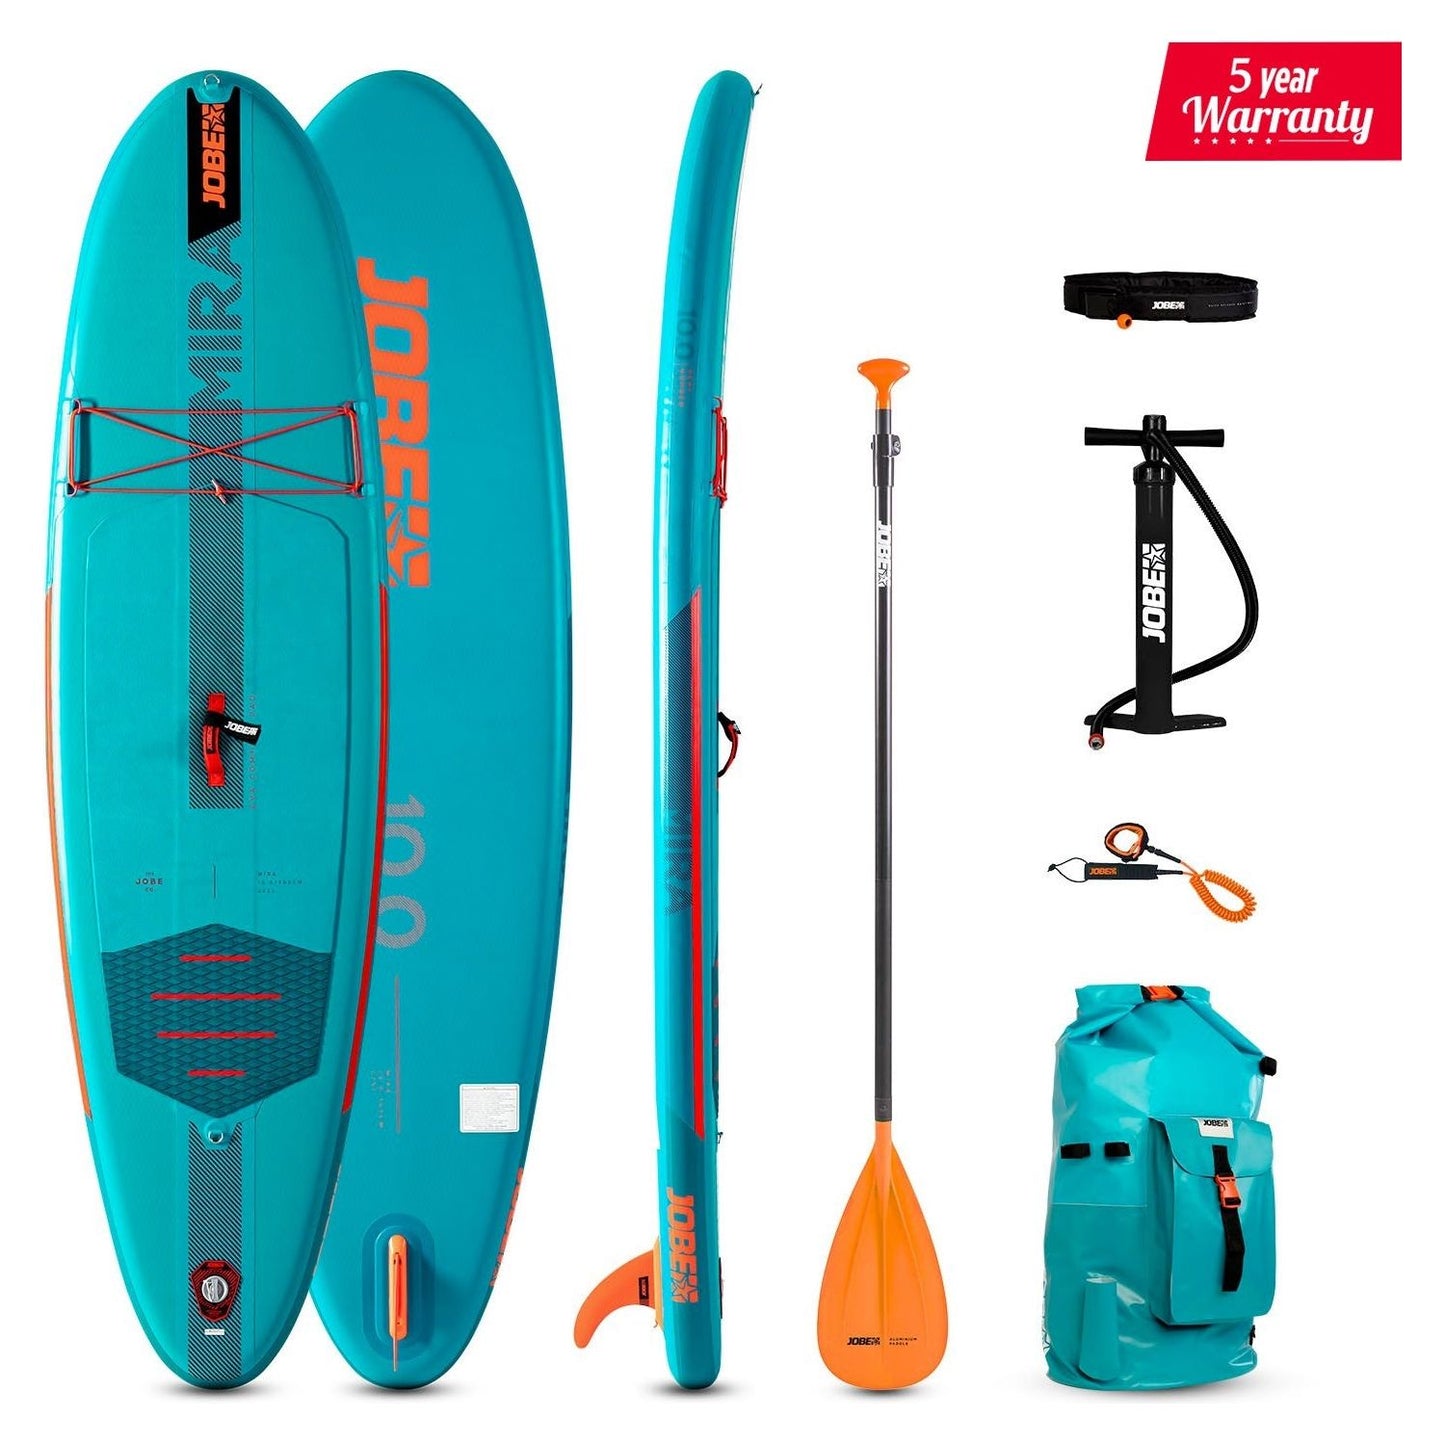 Jobe Stand-up inflatable paddleboard package.